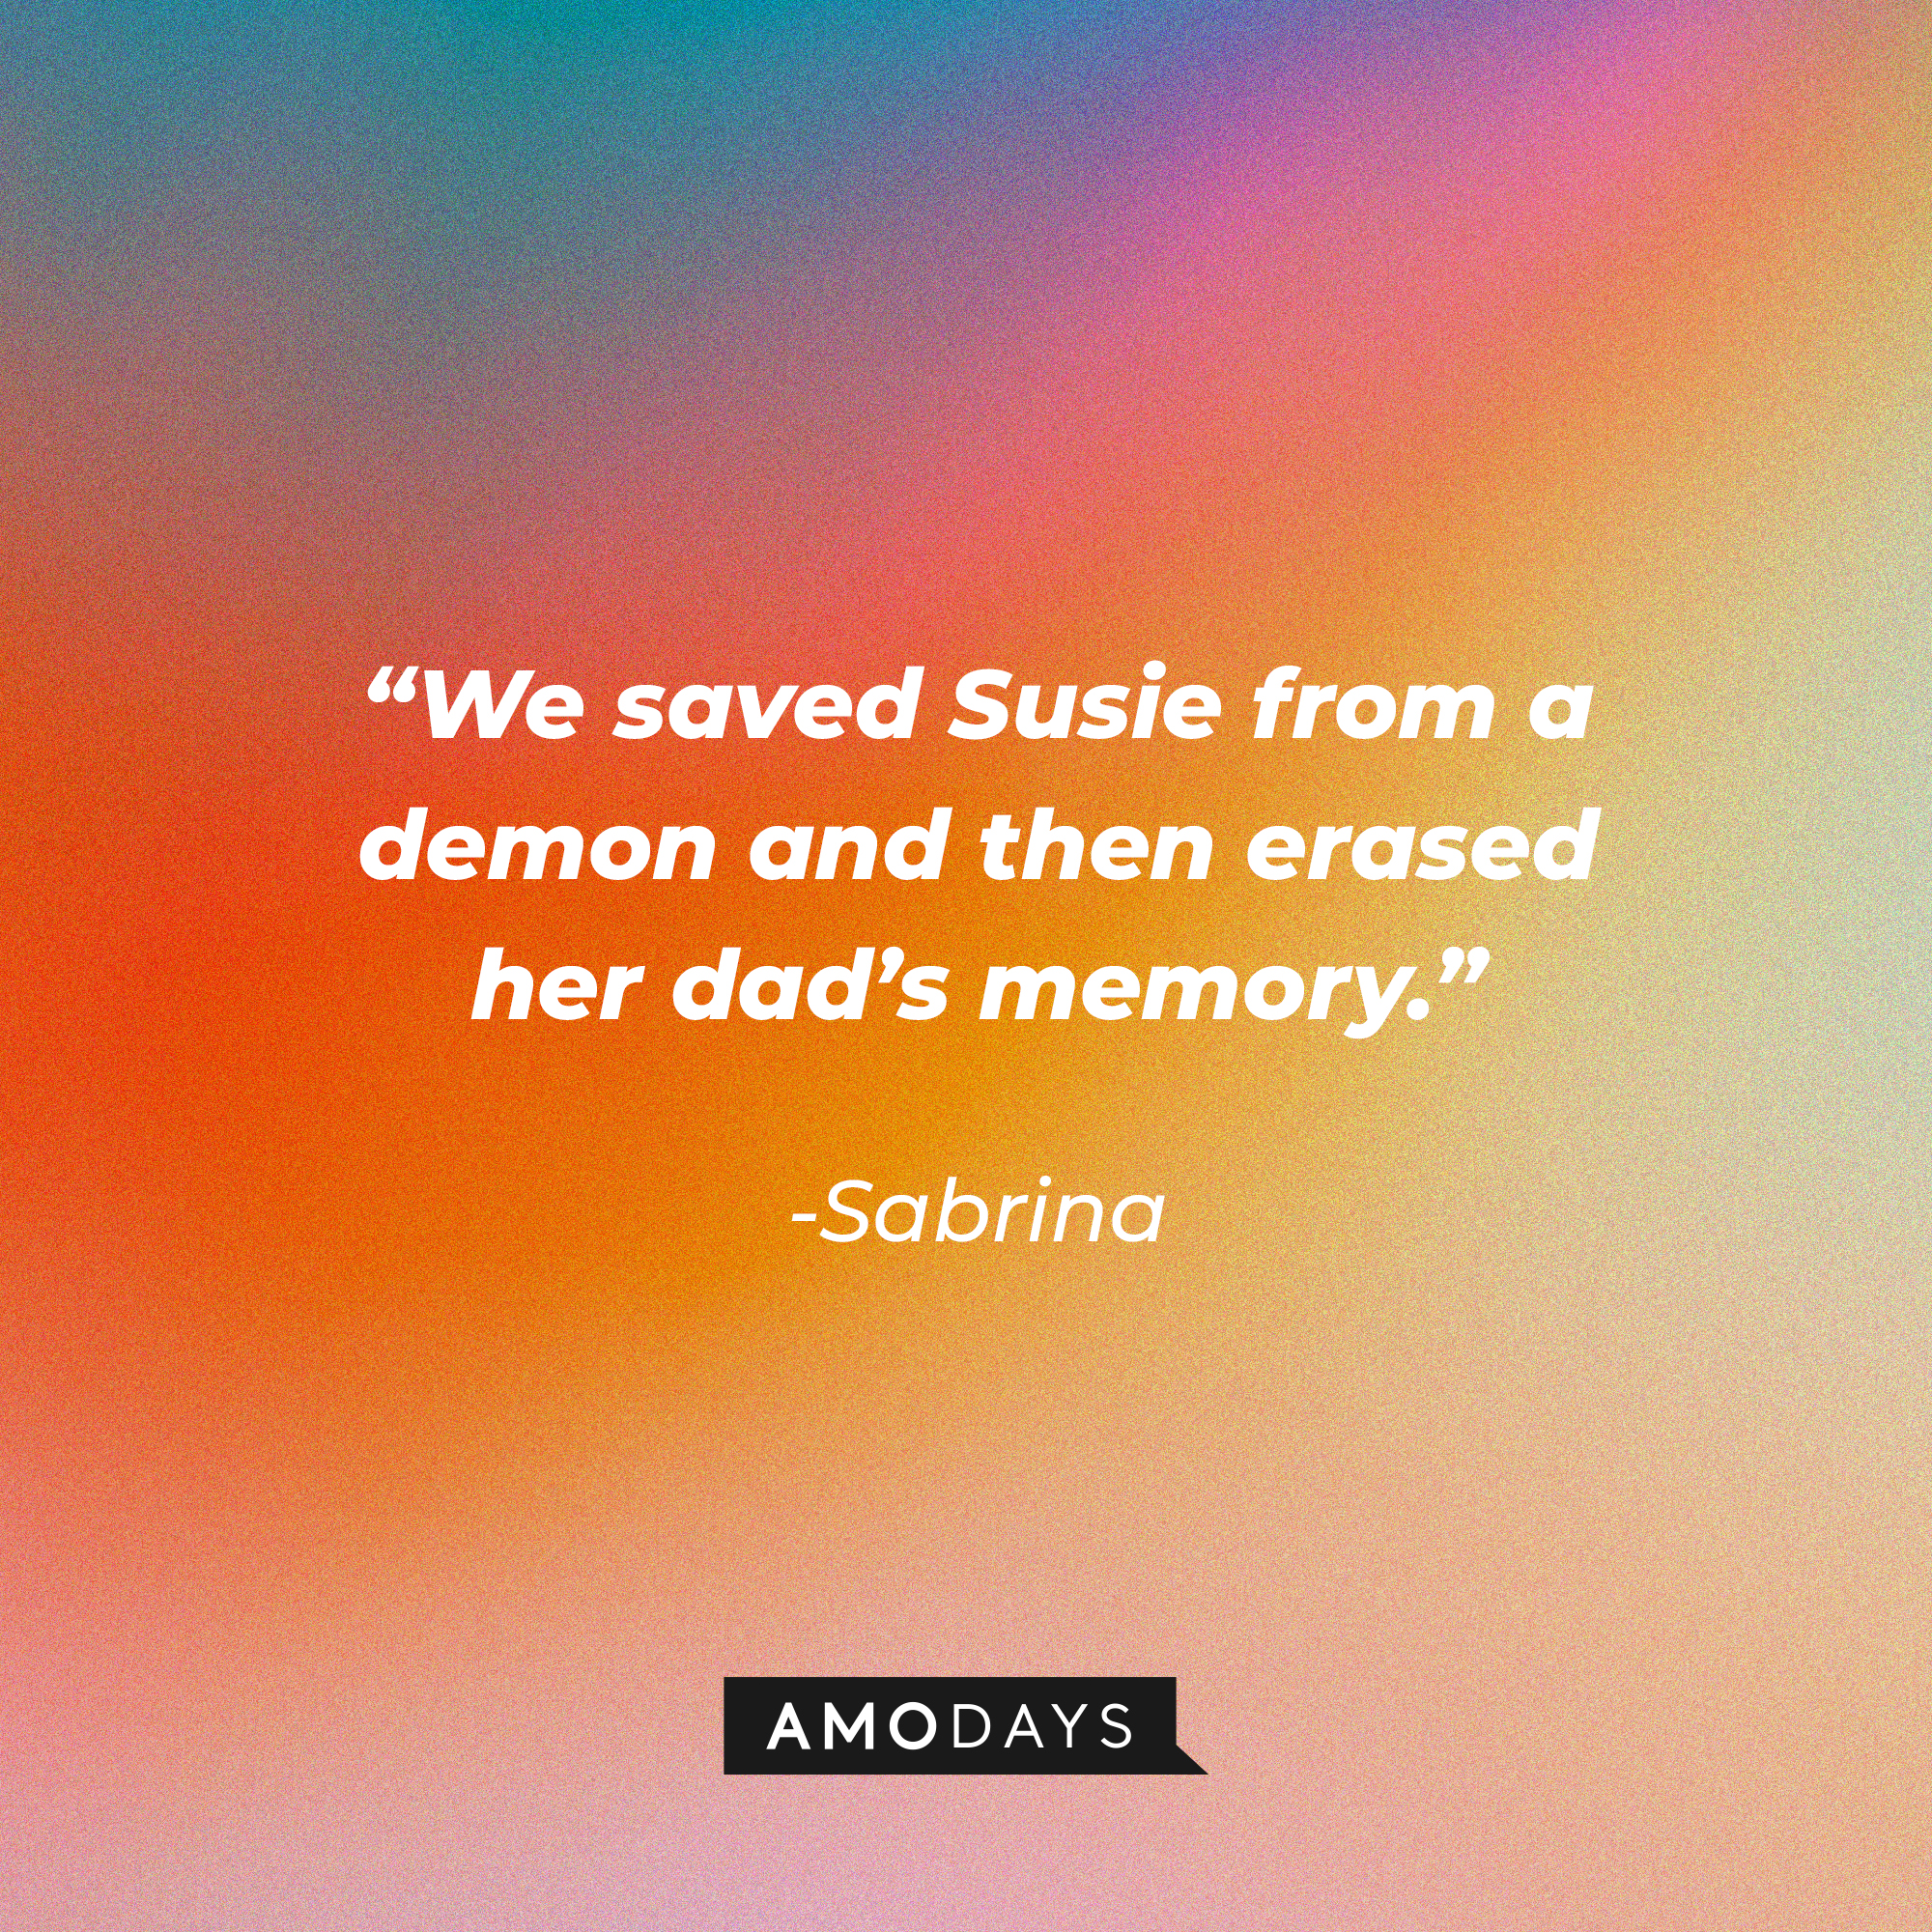 Sabrina's quote: “We saved Susie from a demon and then erased her dad’s memory.” | Source: Amodays